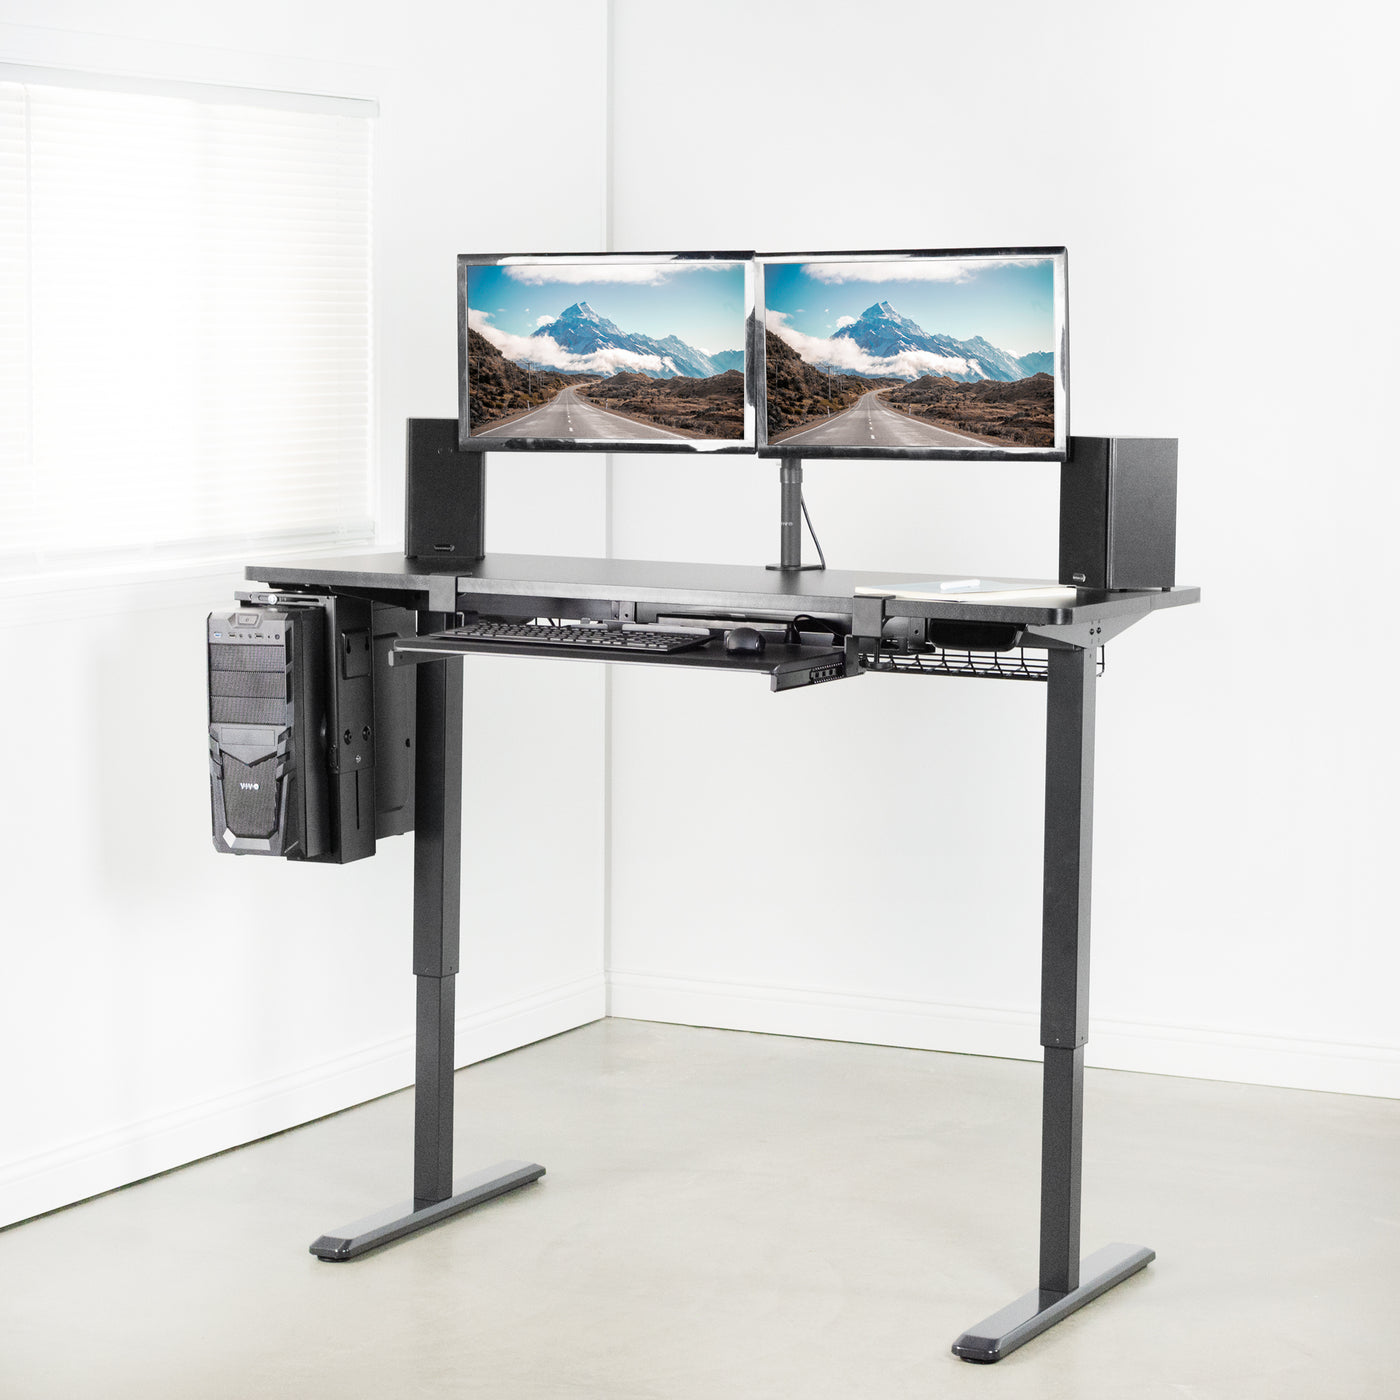 Standing electric desk, supporting under desk PC, cable management net, speaker, and dual monitor mount with under desk sliding keyboard tray.